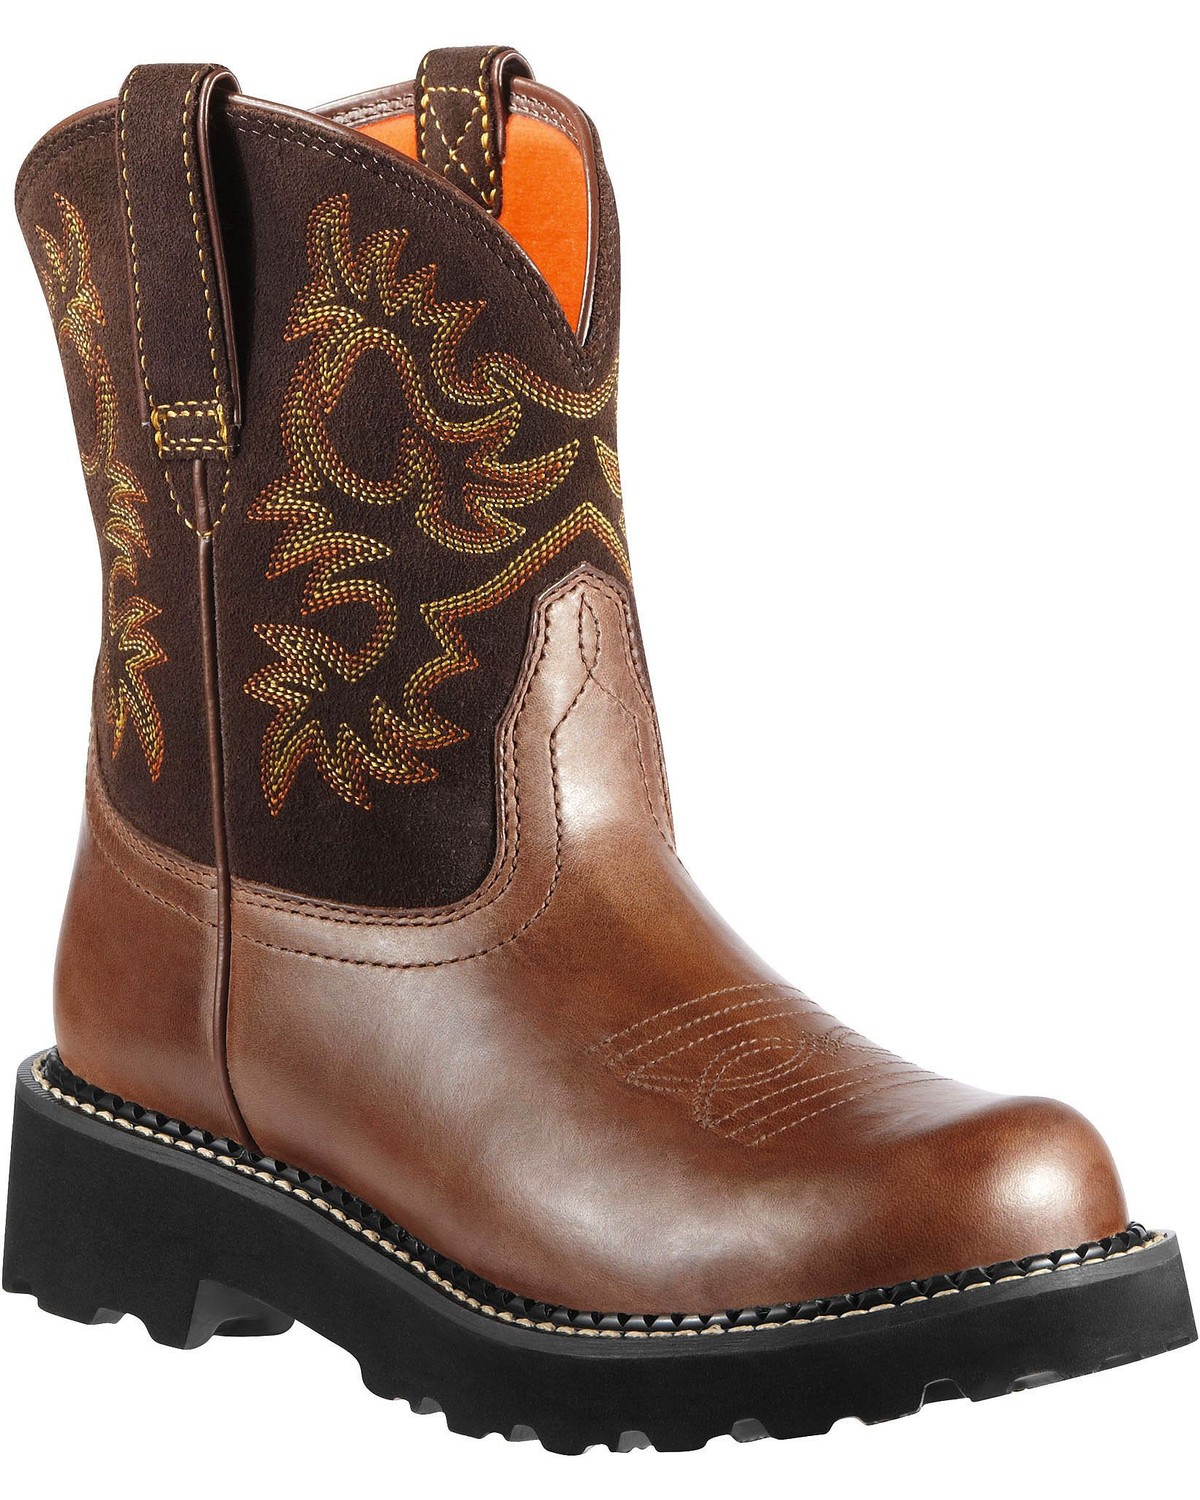 Ariat Women's Fatbaby Western Boots